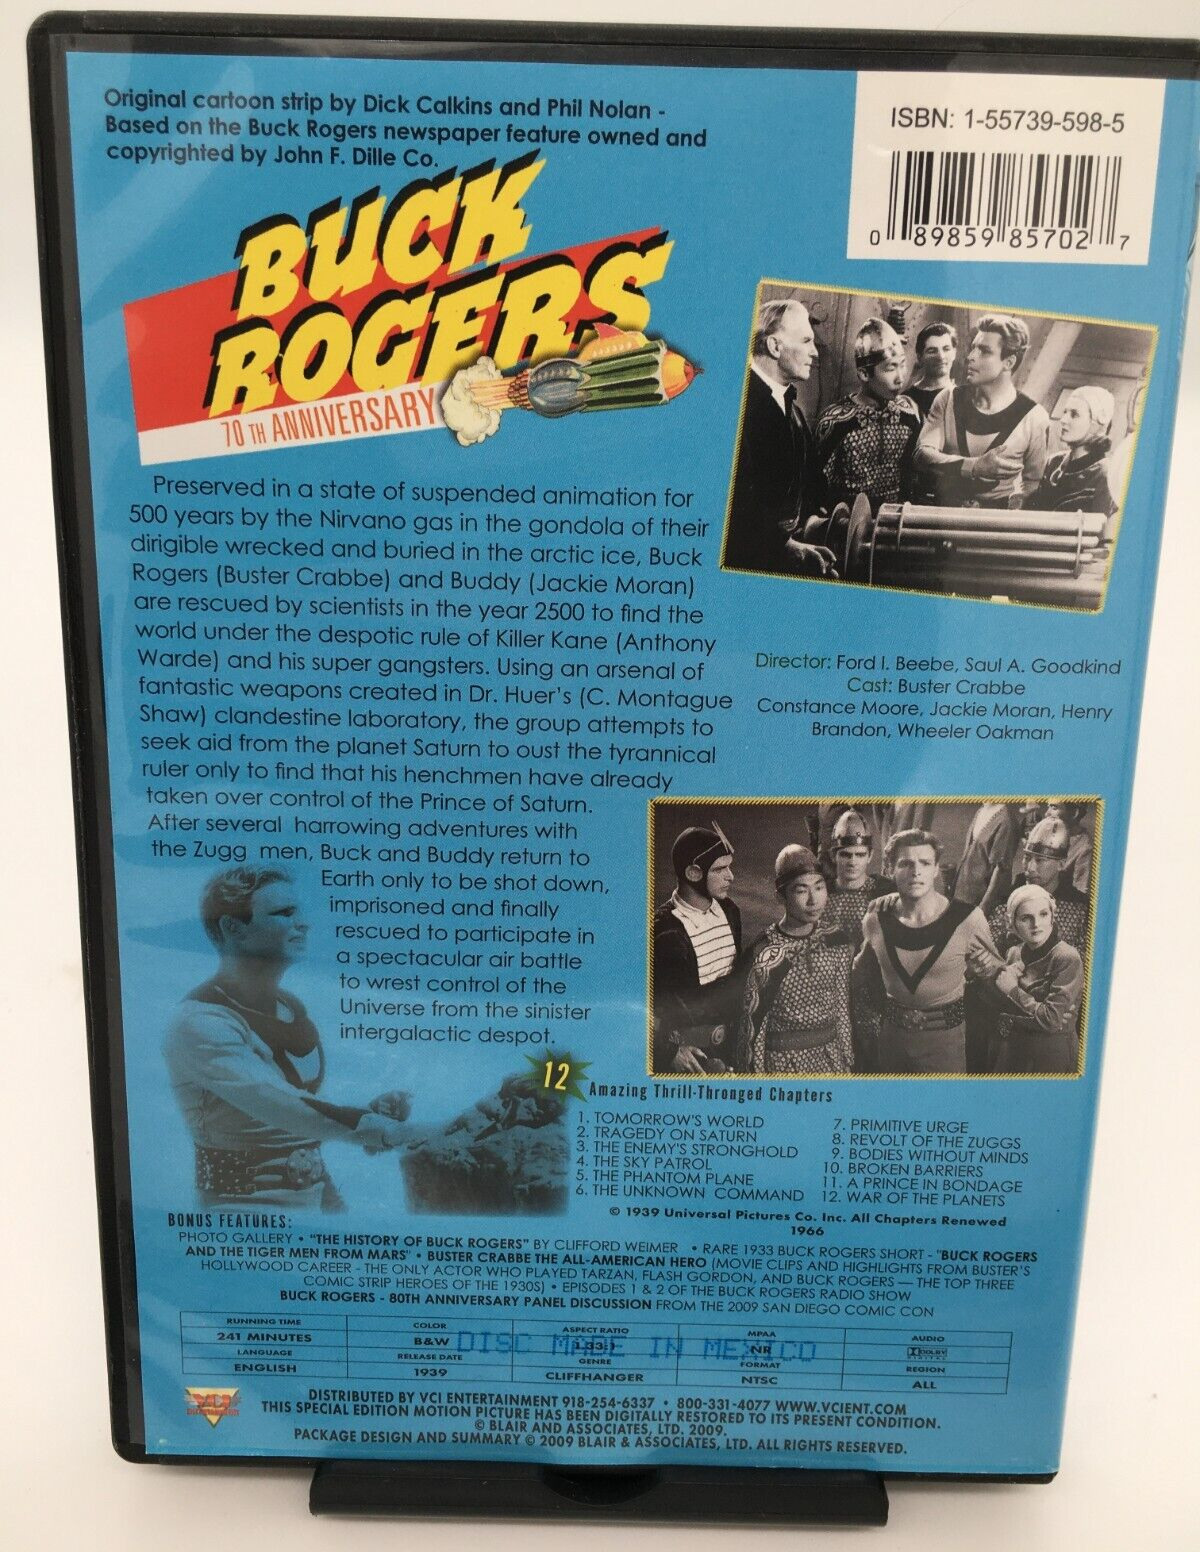 Buck Rogers 70th Anniversary Edition - 2 Disc DVD - Good Condition